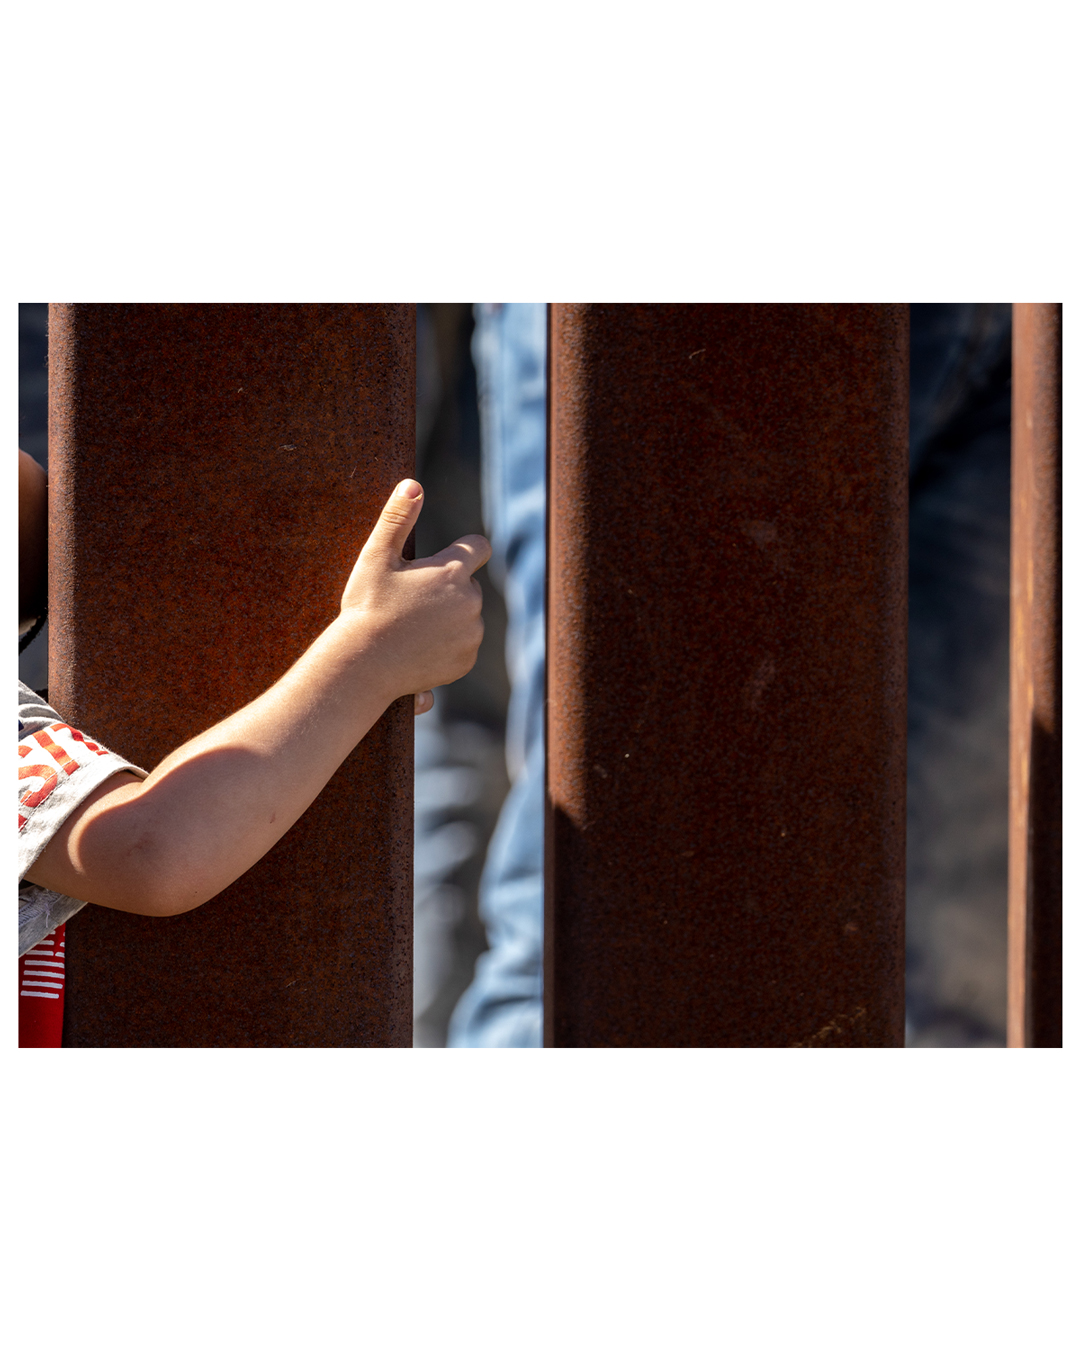 A young person’s arm wraps around one of the slats of the border wall.